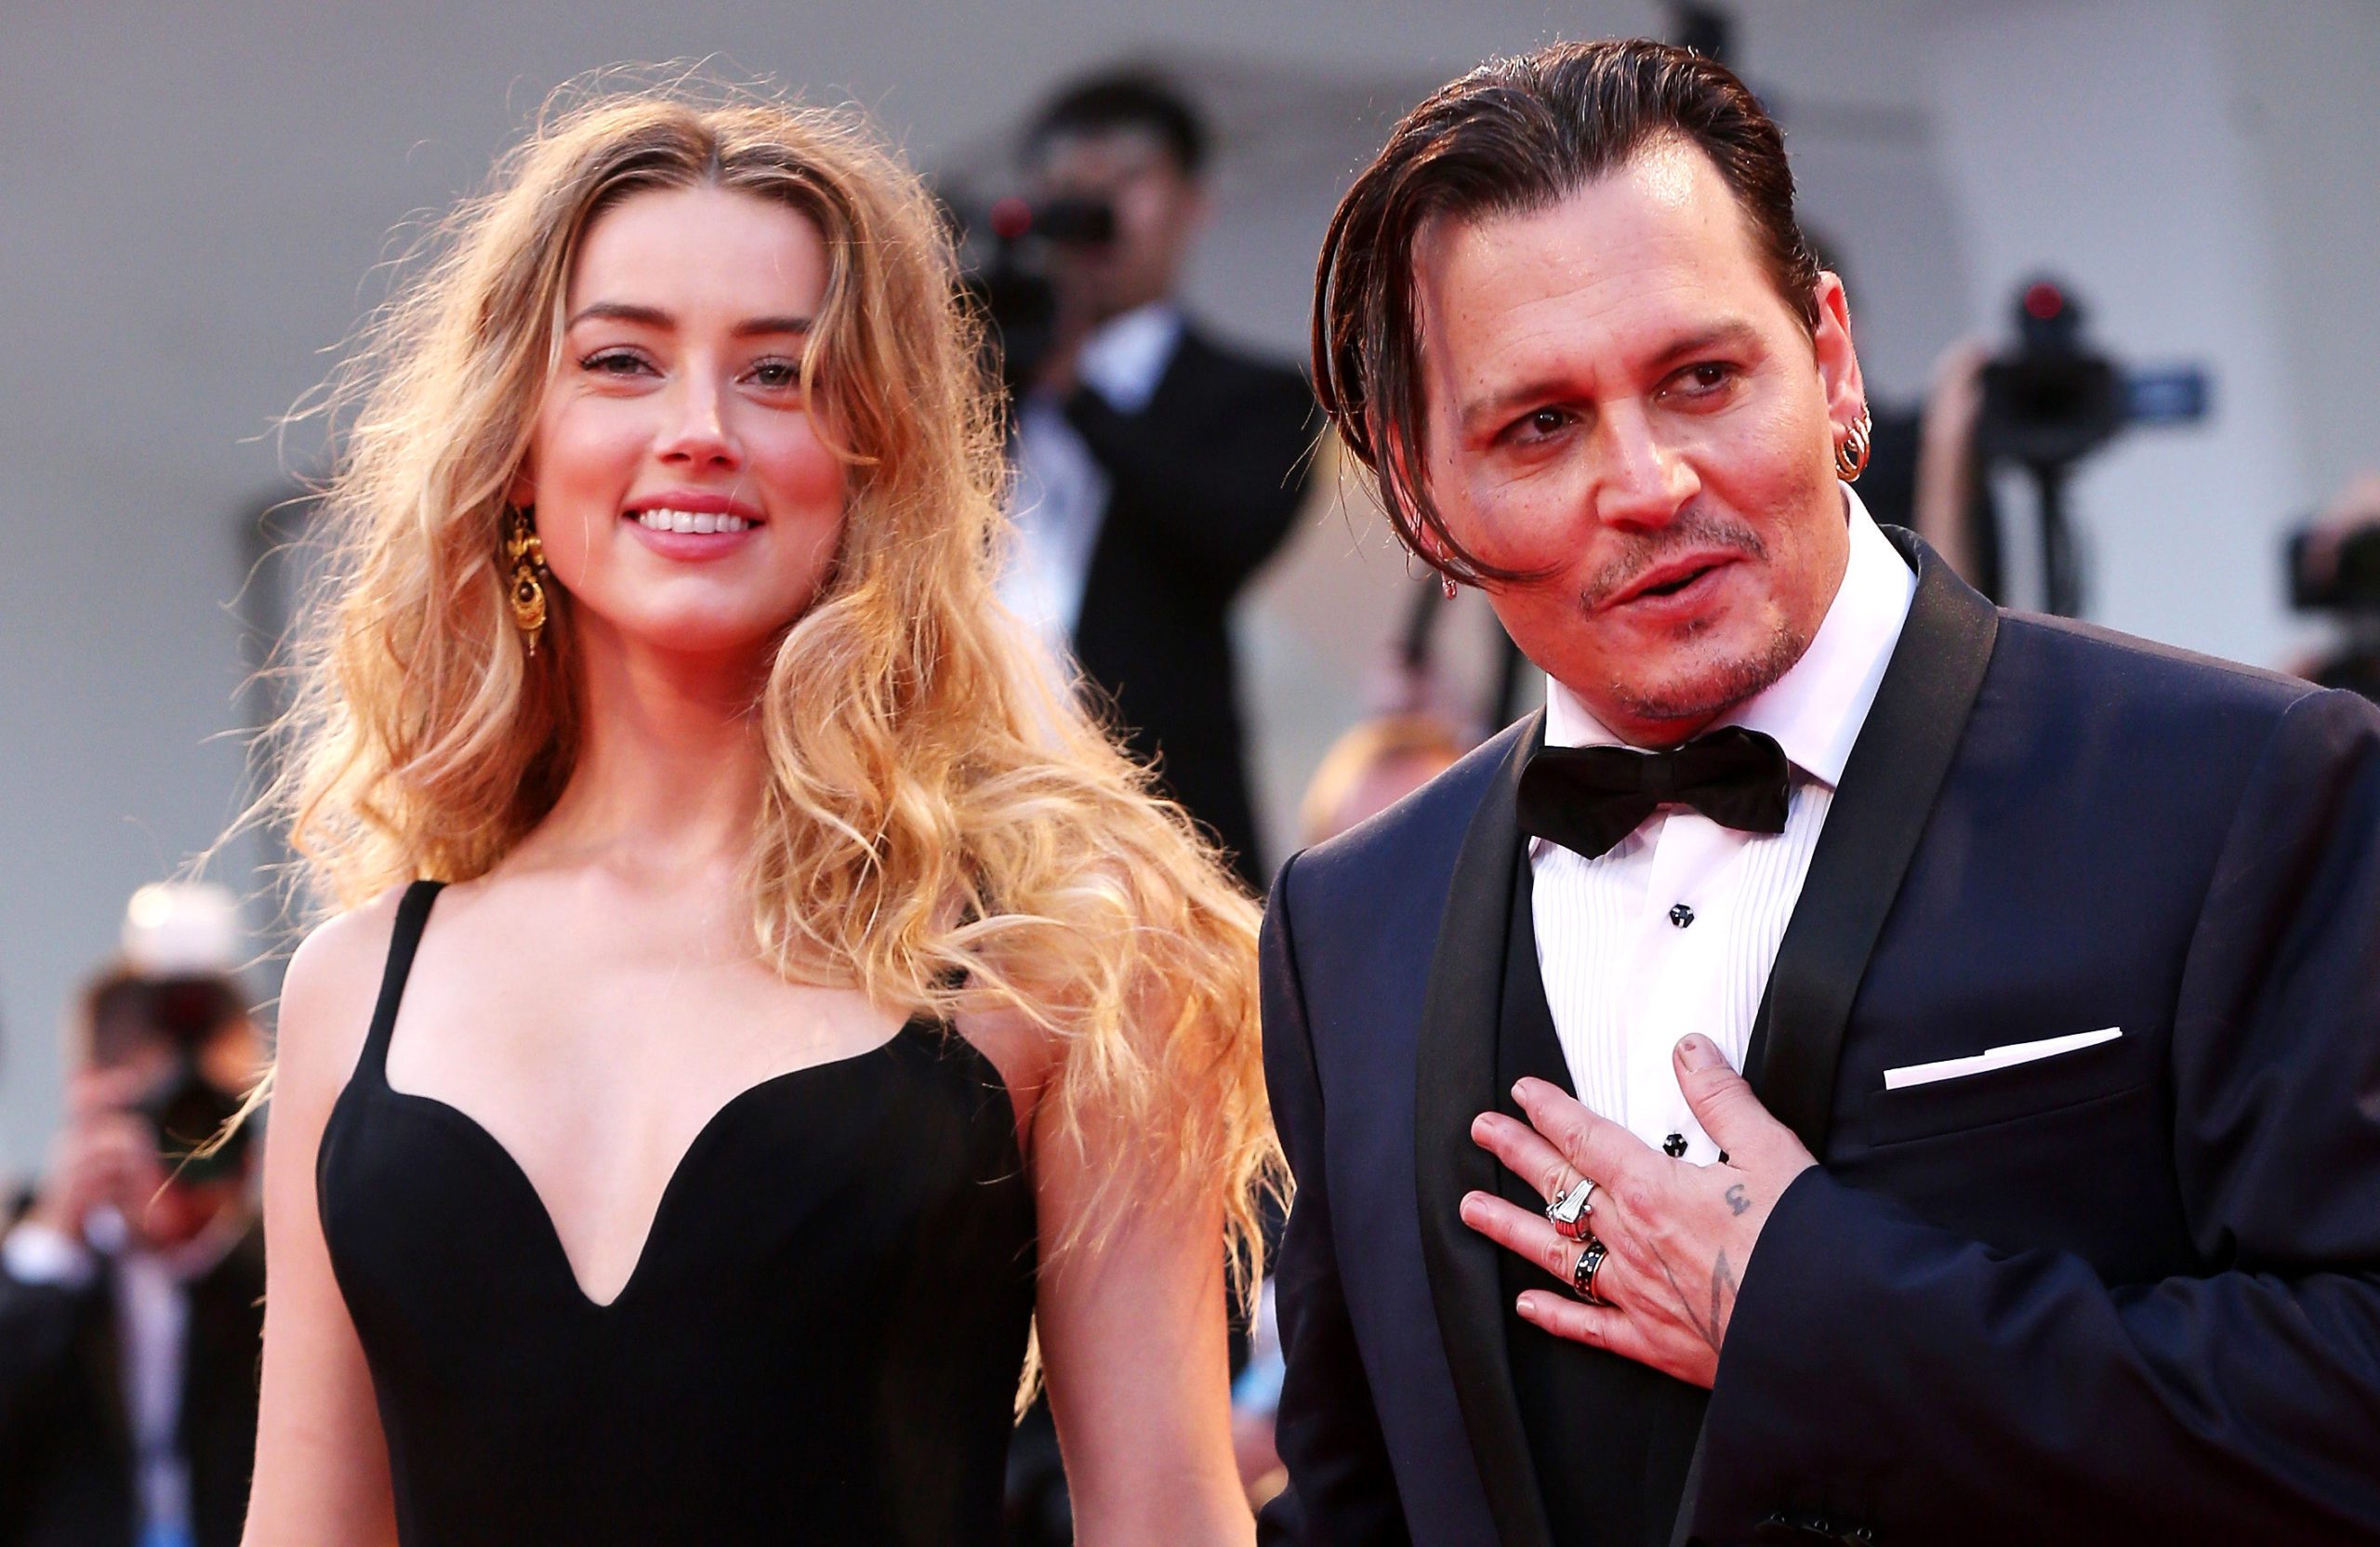 Johnny-Depp-Claims-Amber-Heard-Had-Threesome-With-Cara-Delevingne-And-Elon-Musk